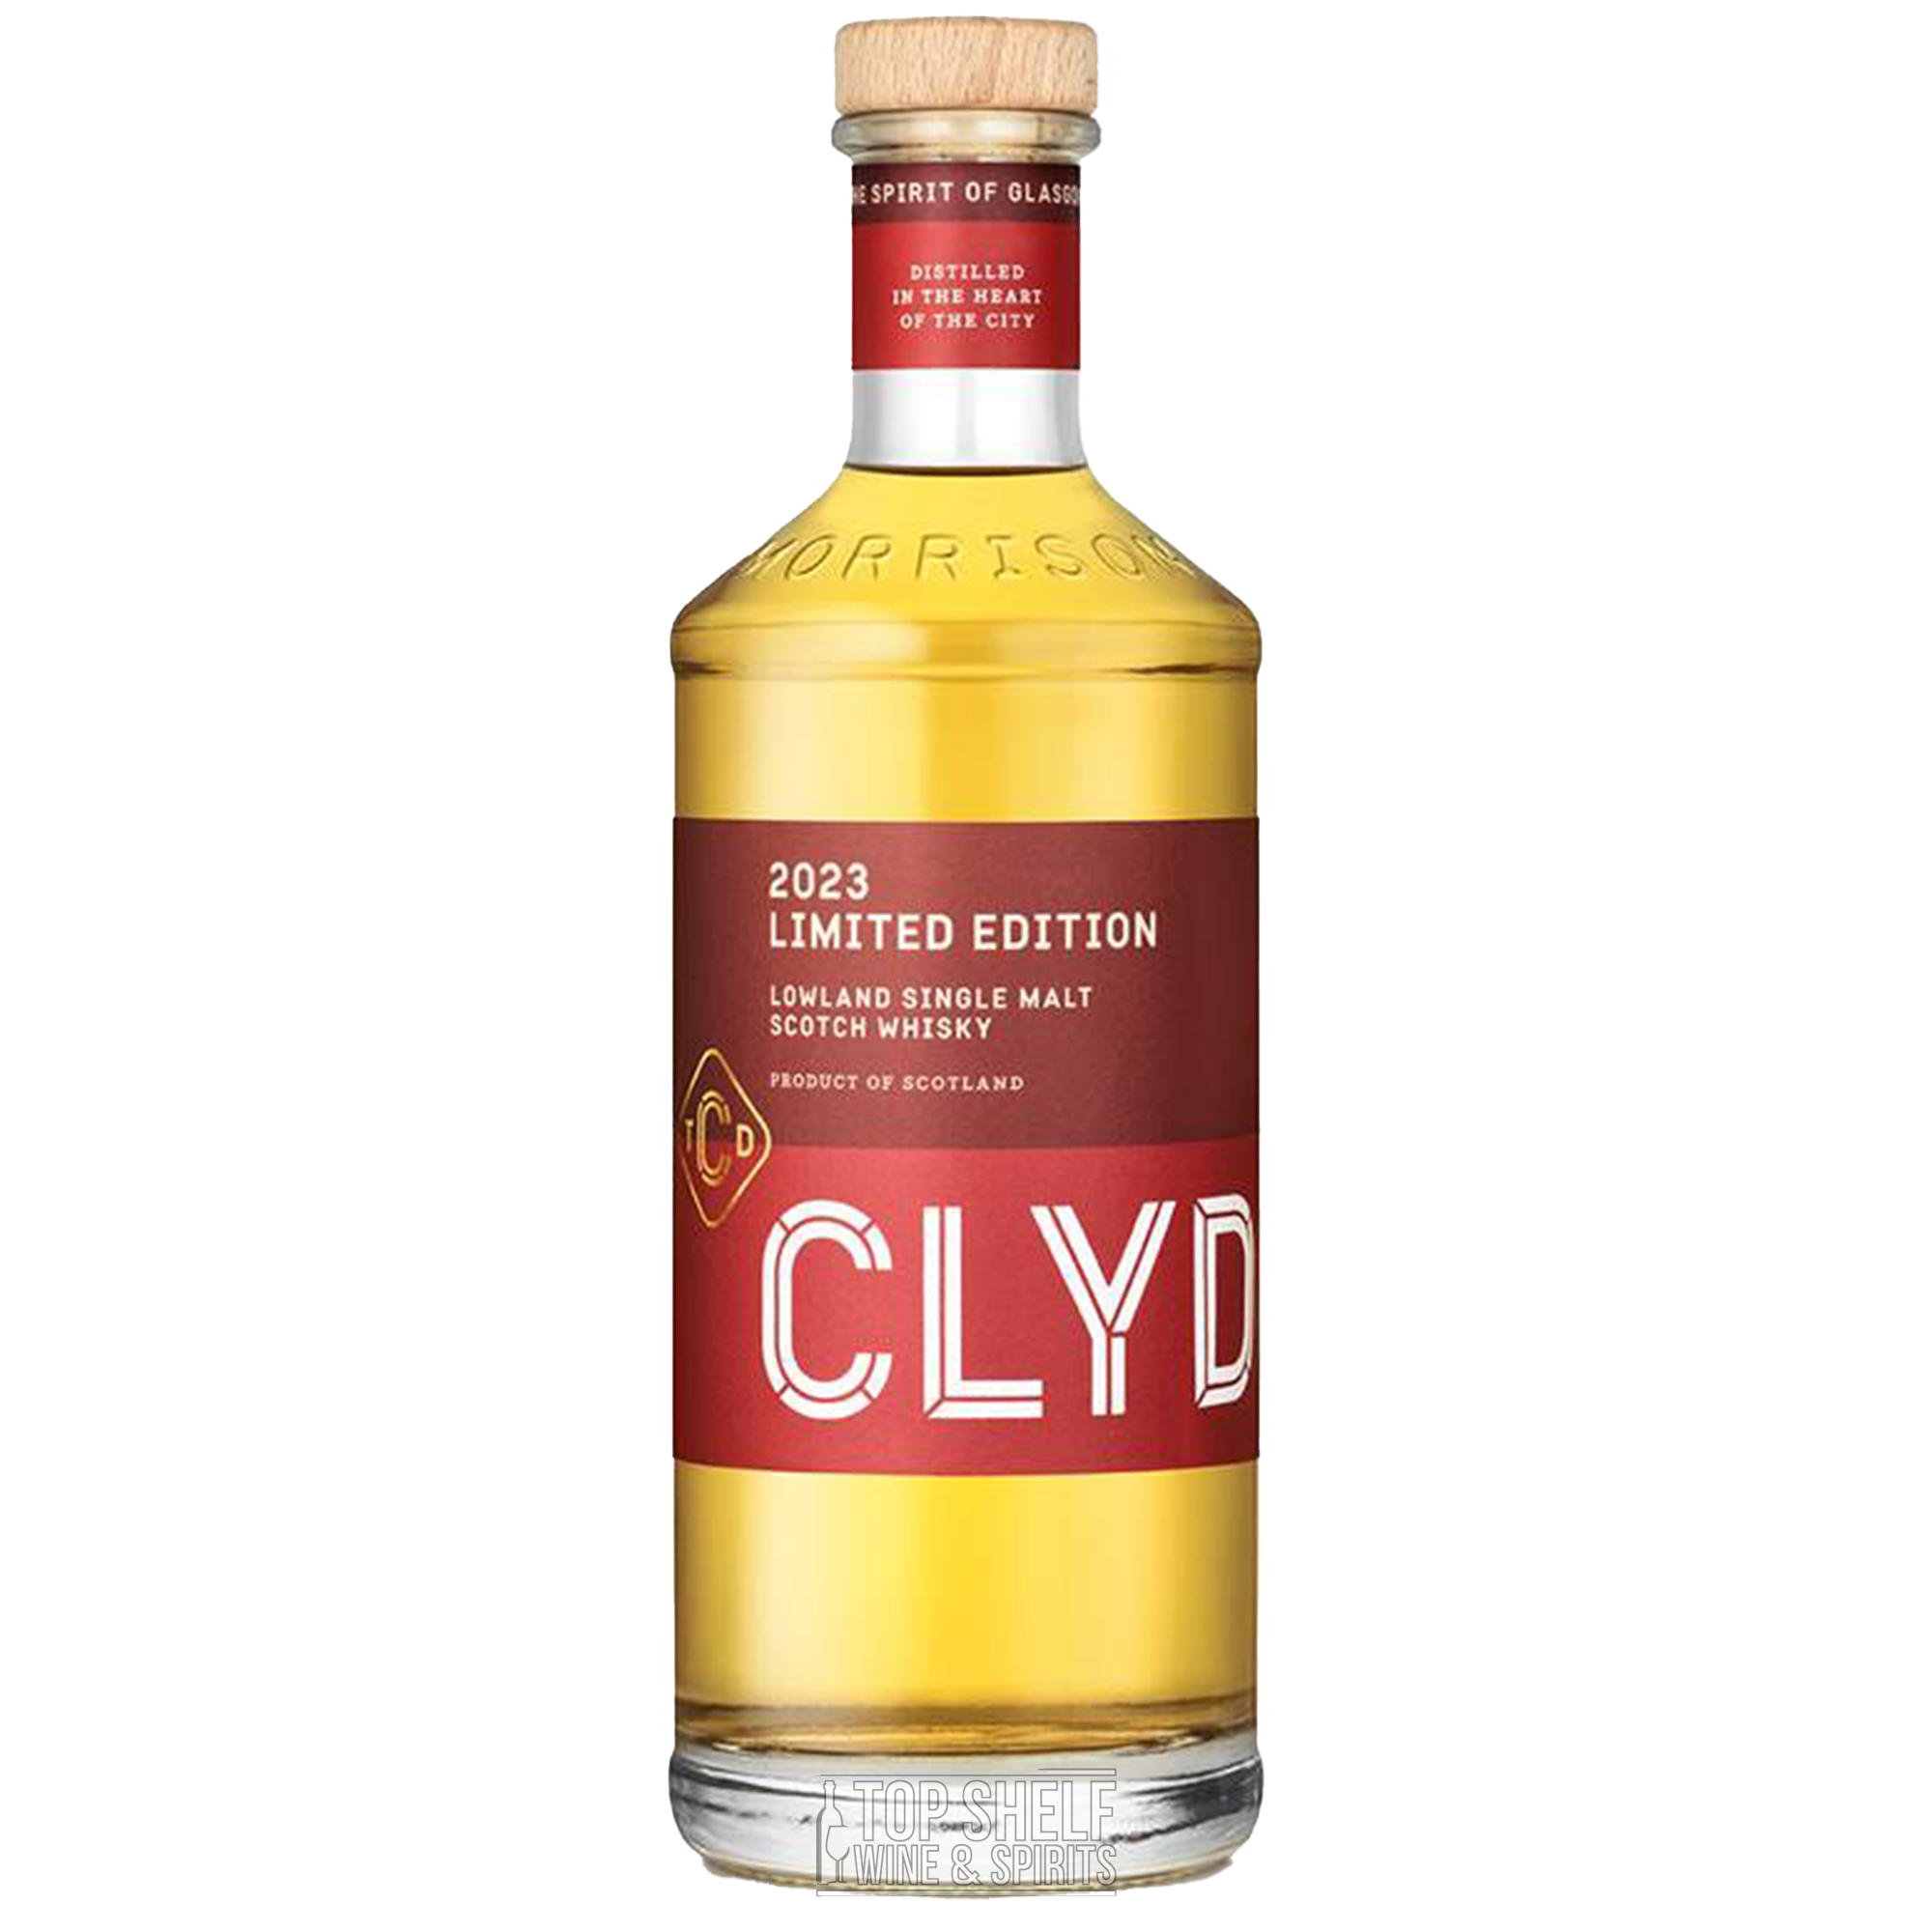 Clydeside 2023 Limited Edition Lowland Single Malt Scotch Whisky